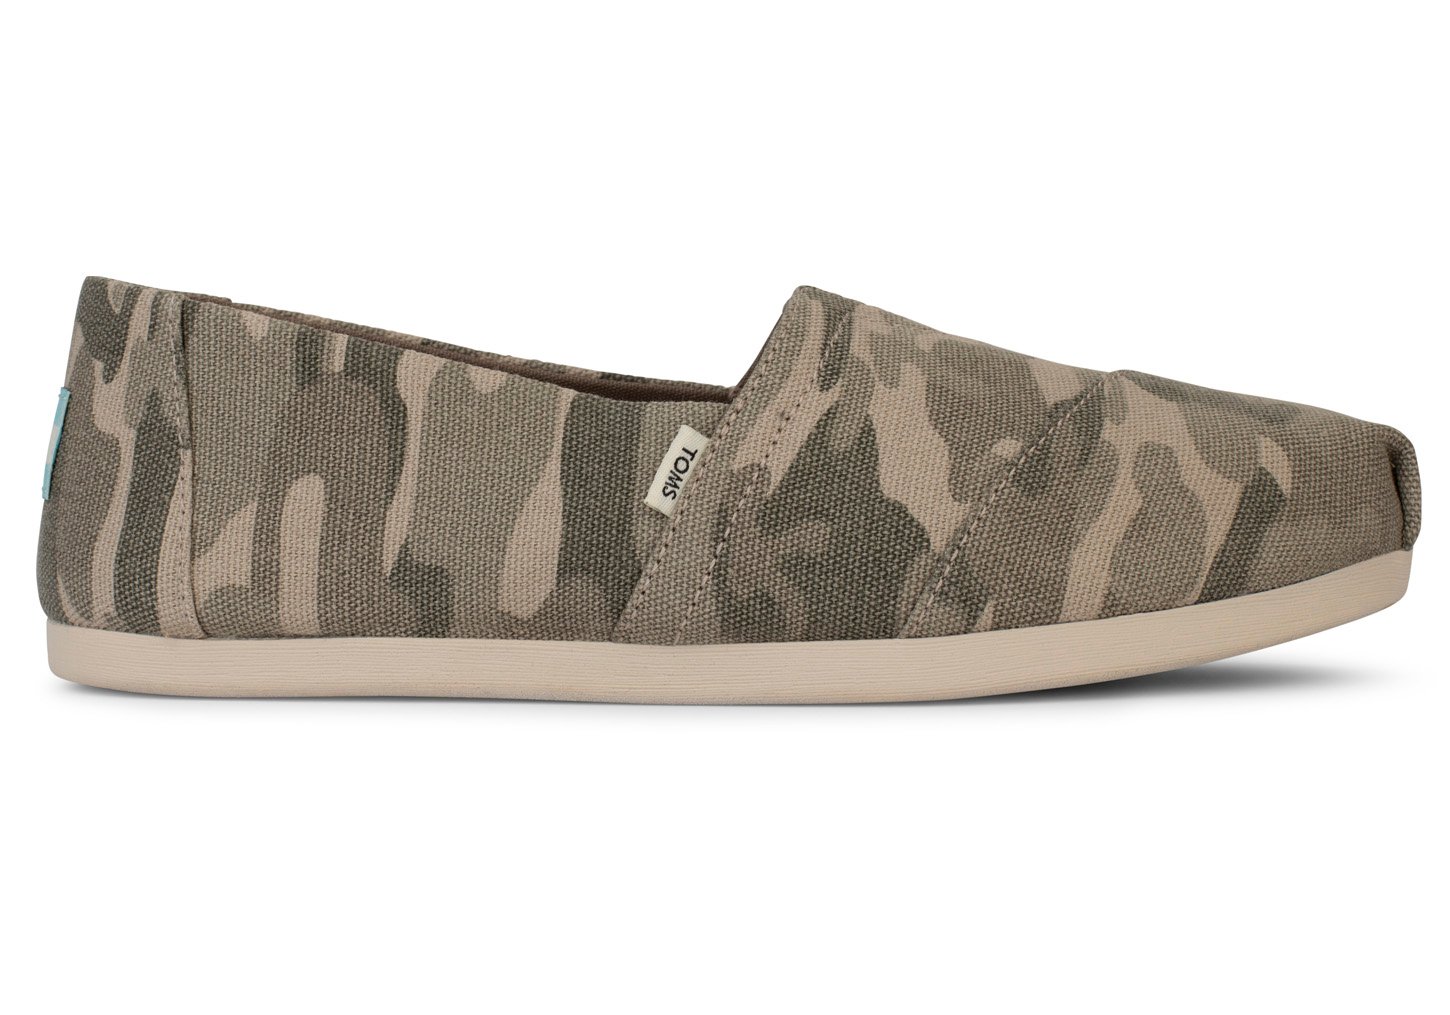 Does Toms Make a Camouflage Shoe?